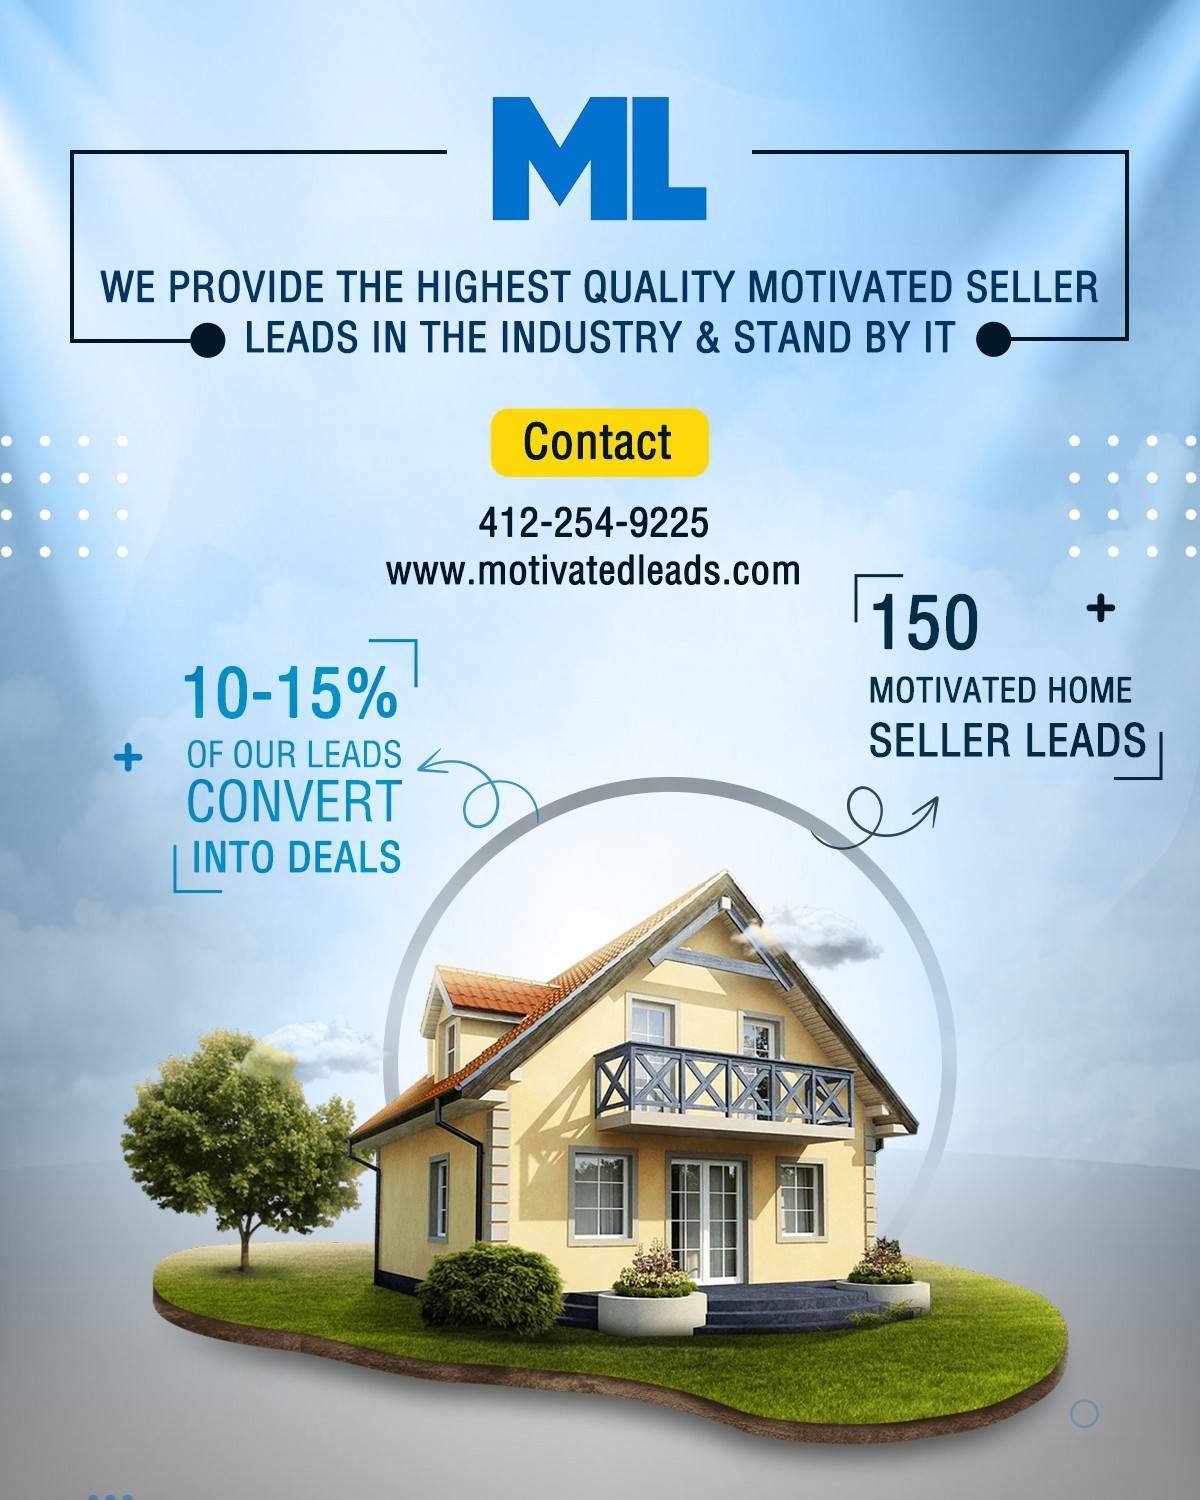 Get Top-Quality Motivated Seller Leads | Motivated Leads